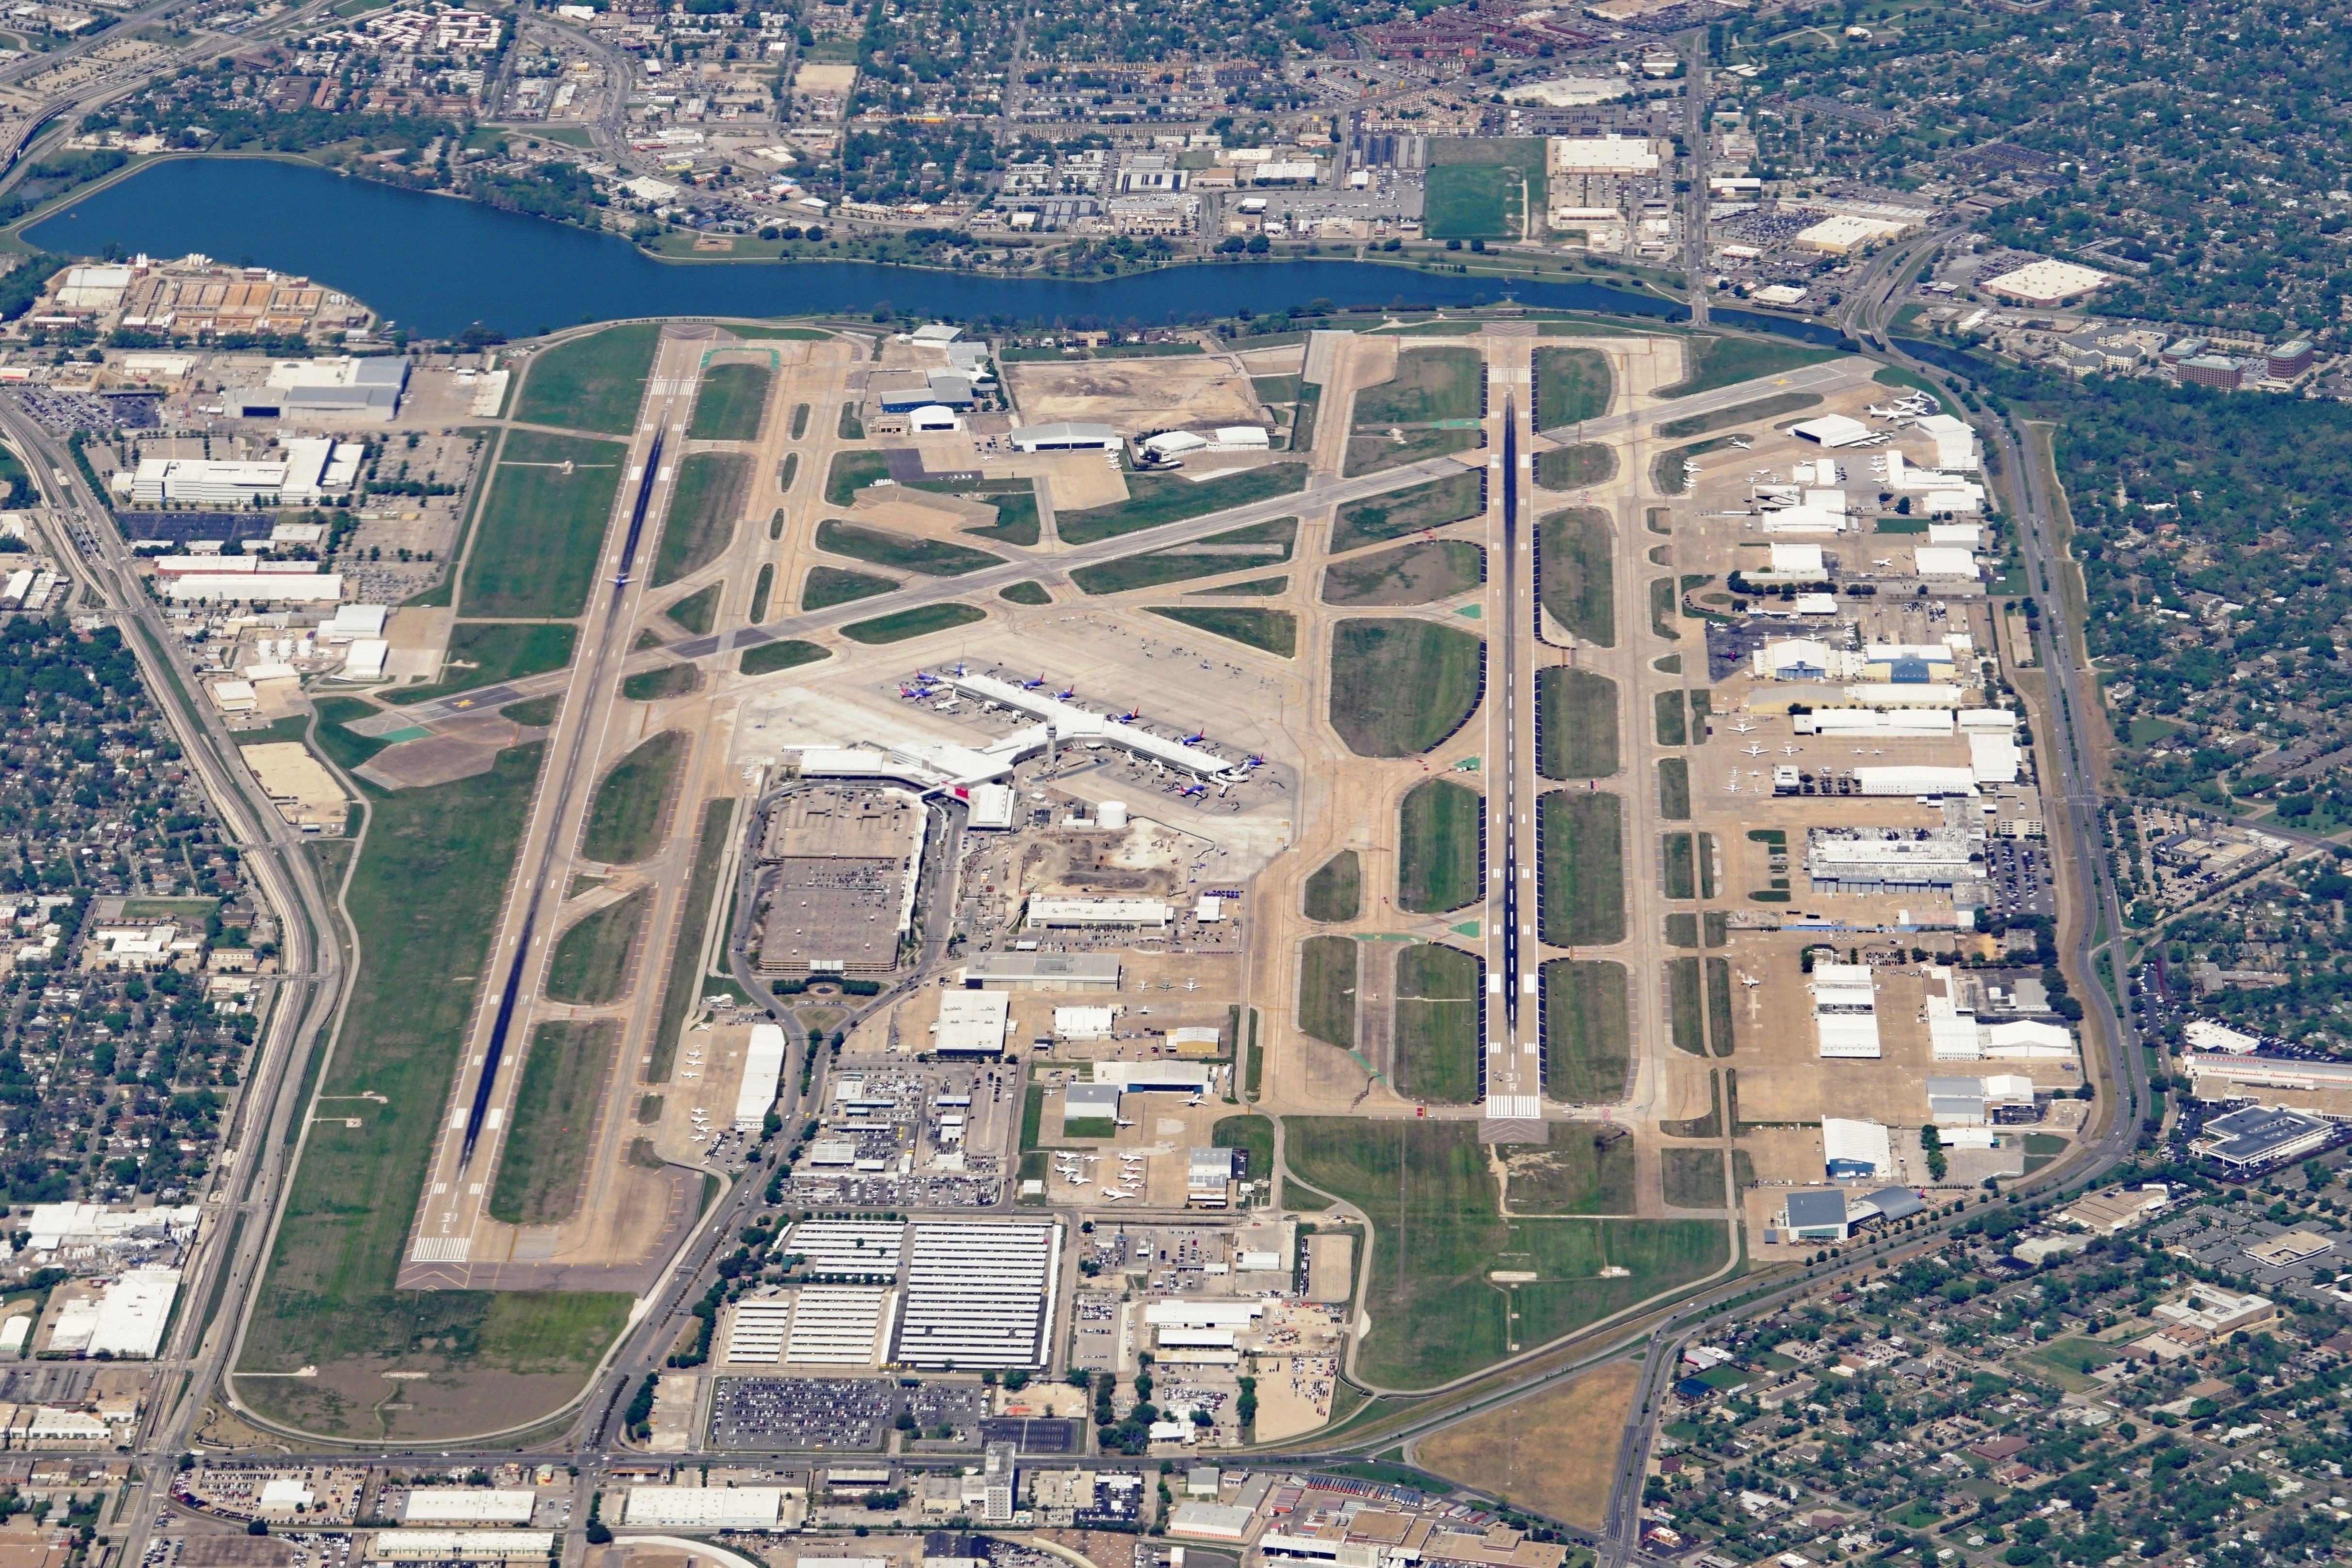 An Aerial View of Dallas Love Field Airport.